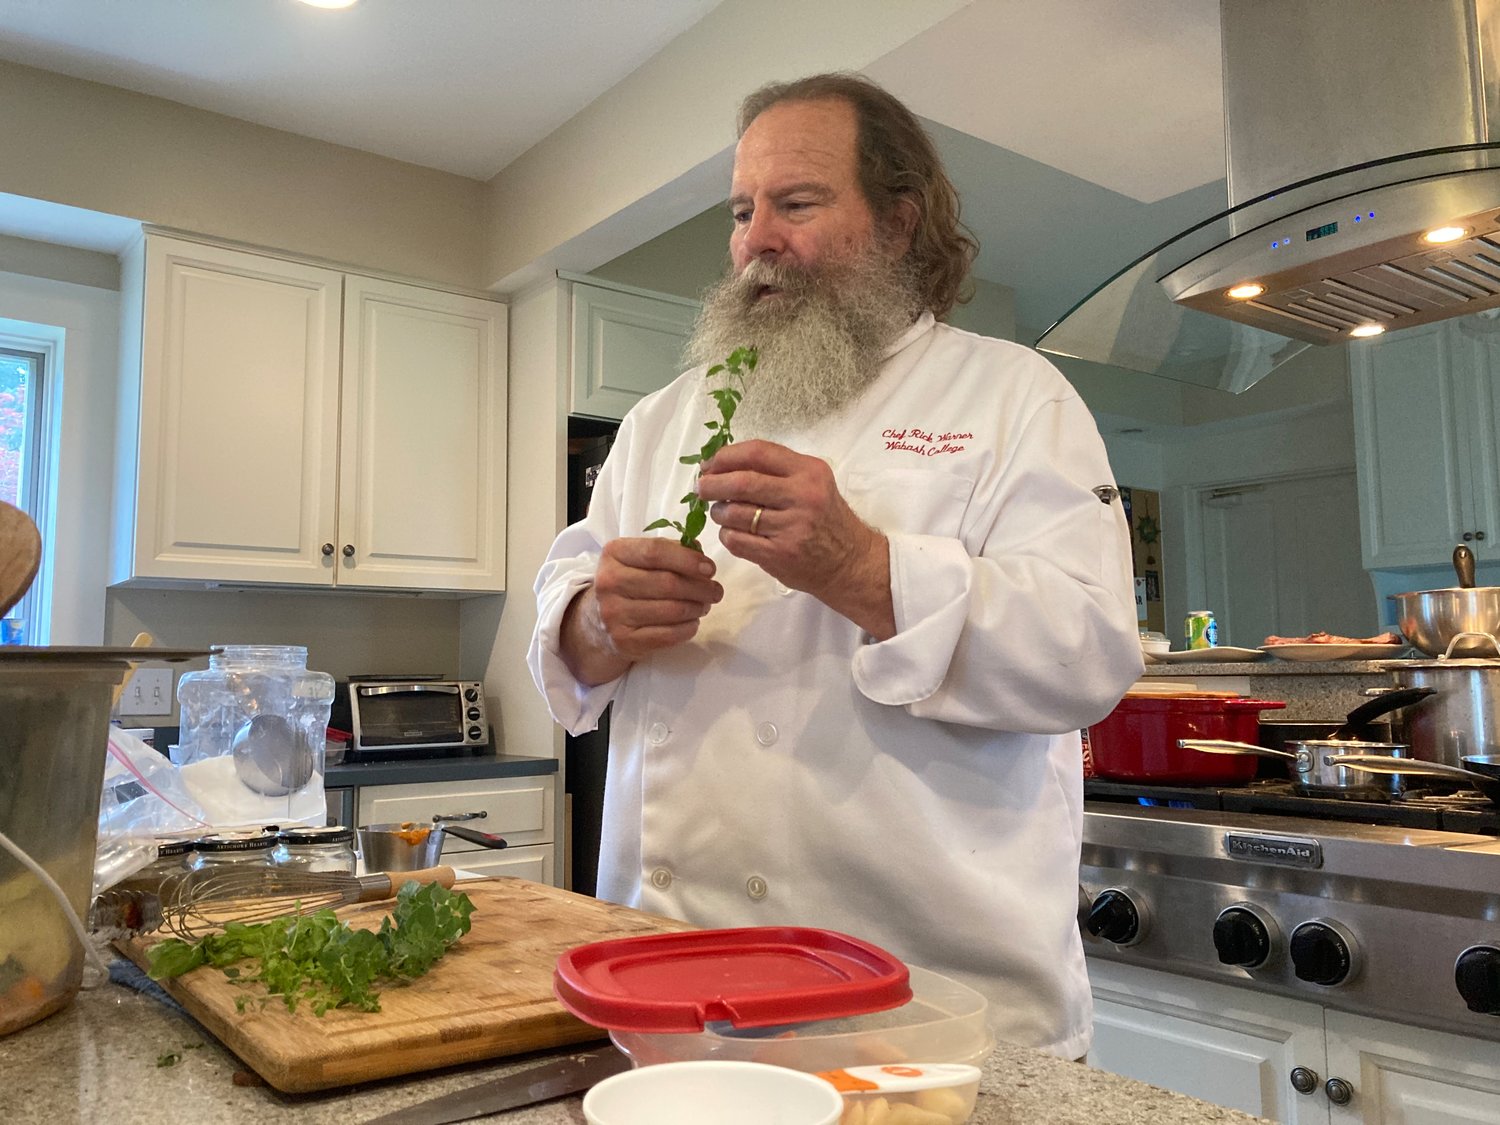 Richard Warner conducts a virtual cooking class from his kitchen.